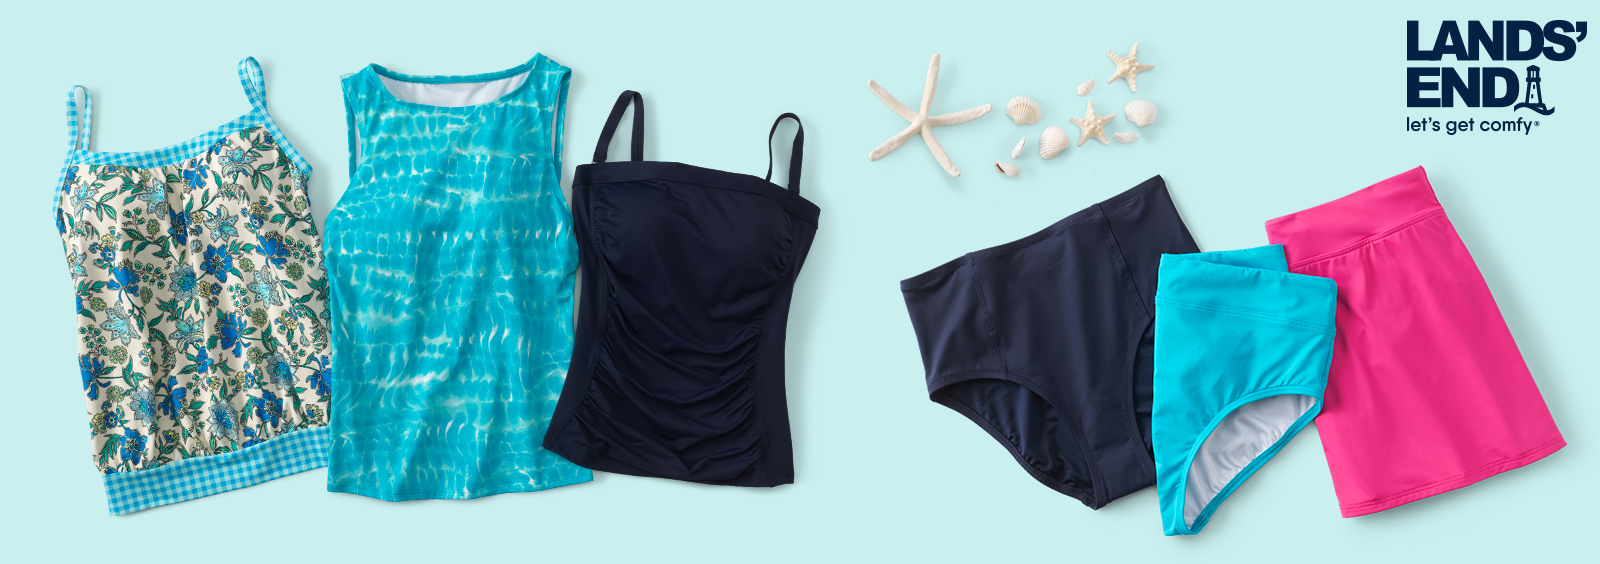 5 Features to Consider When Choosing a Women’s Swimsuit Top | Lands’ End